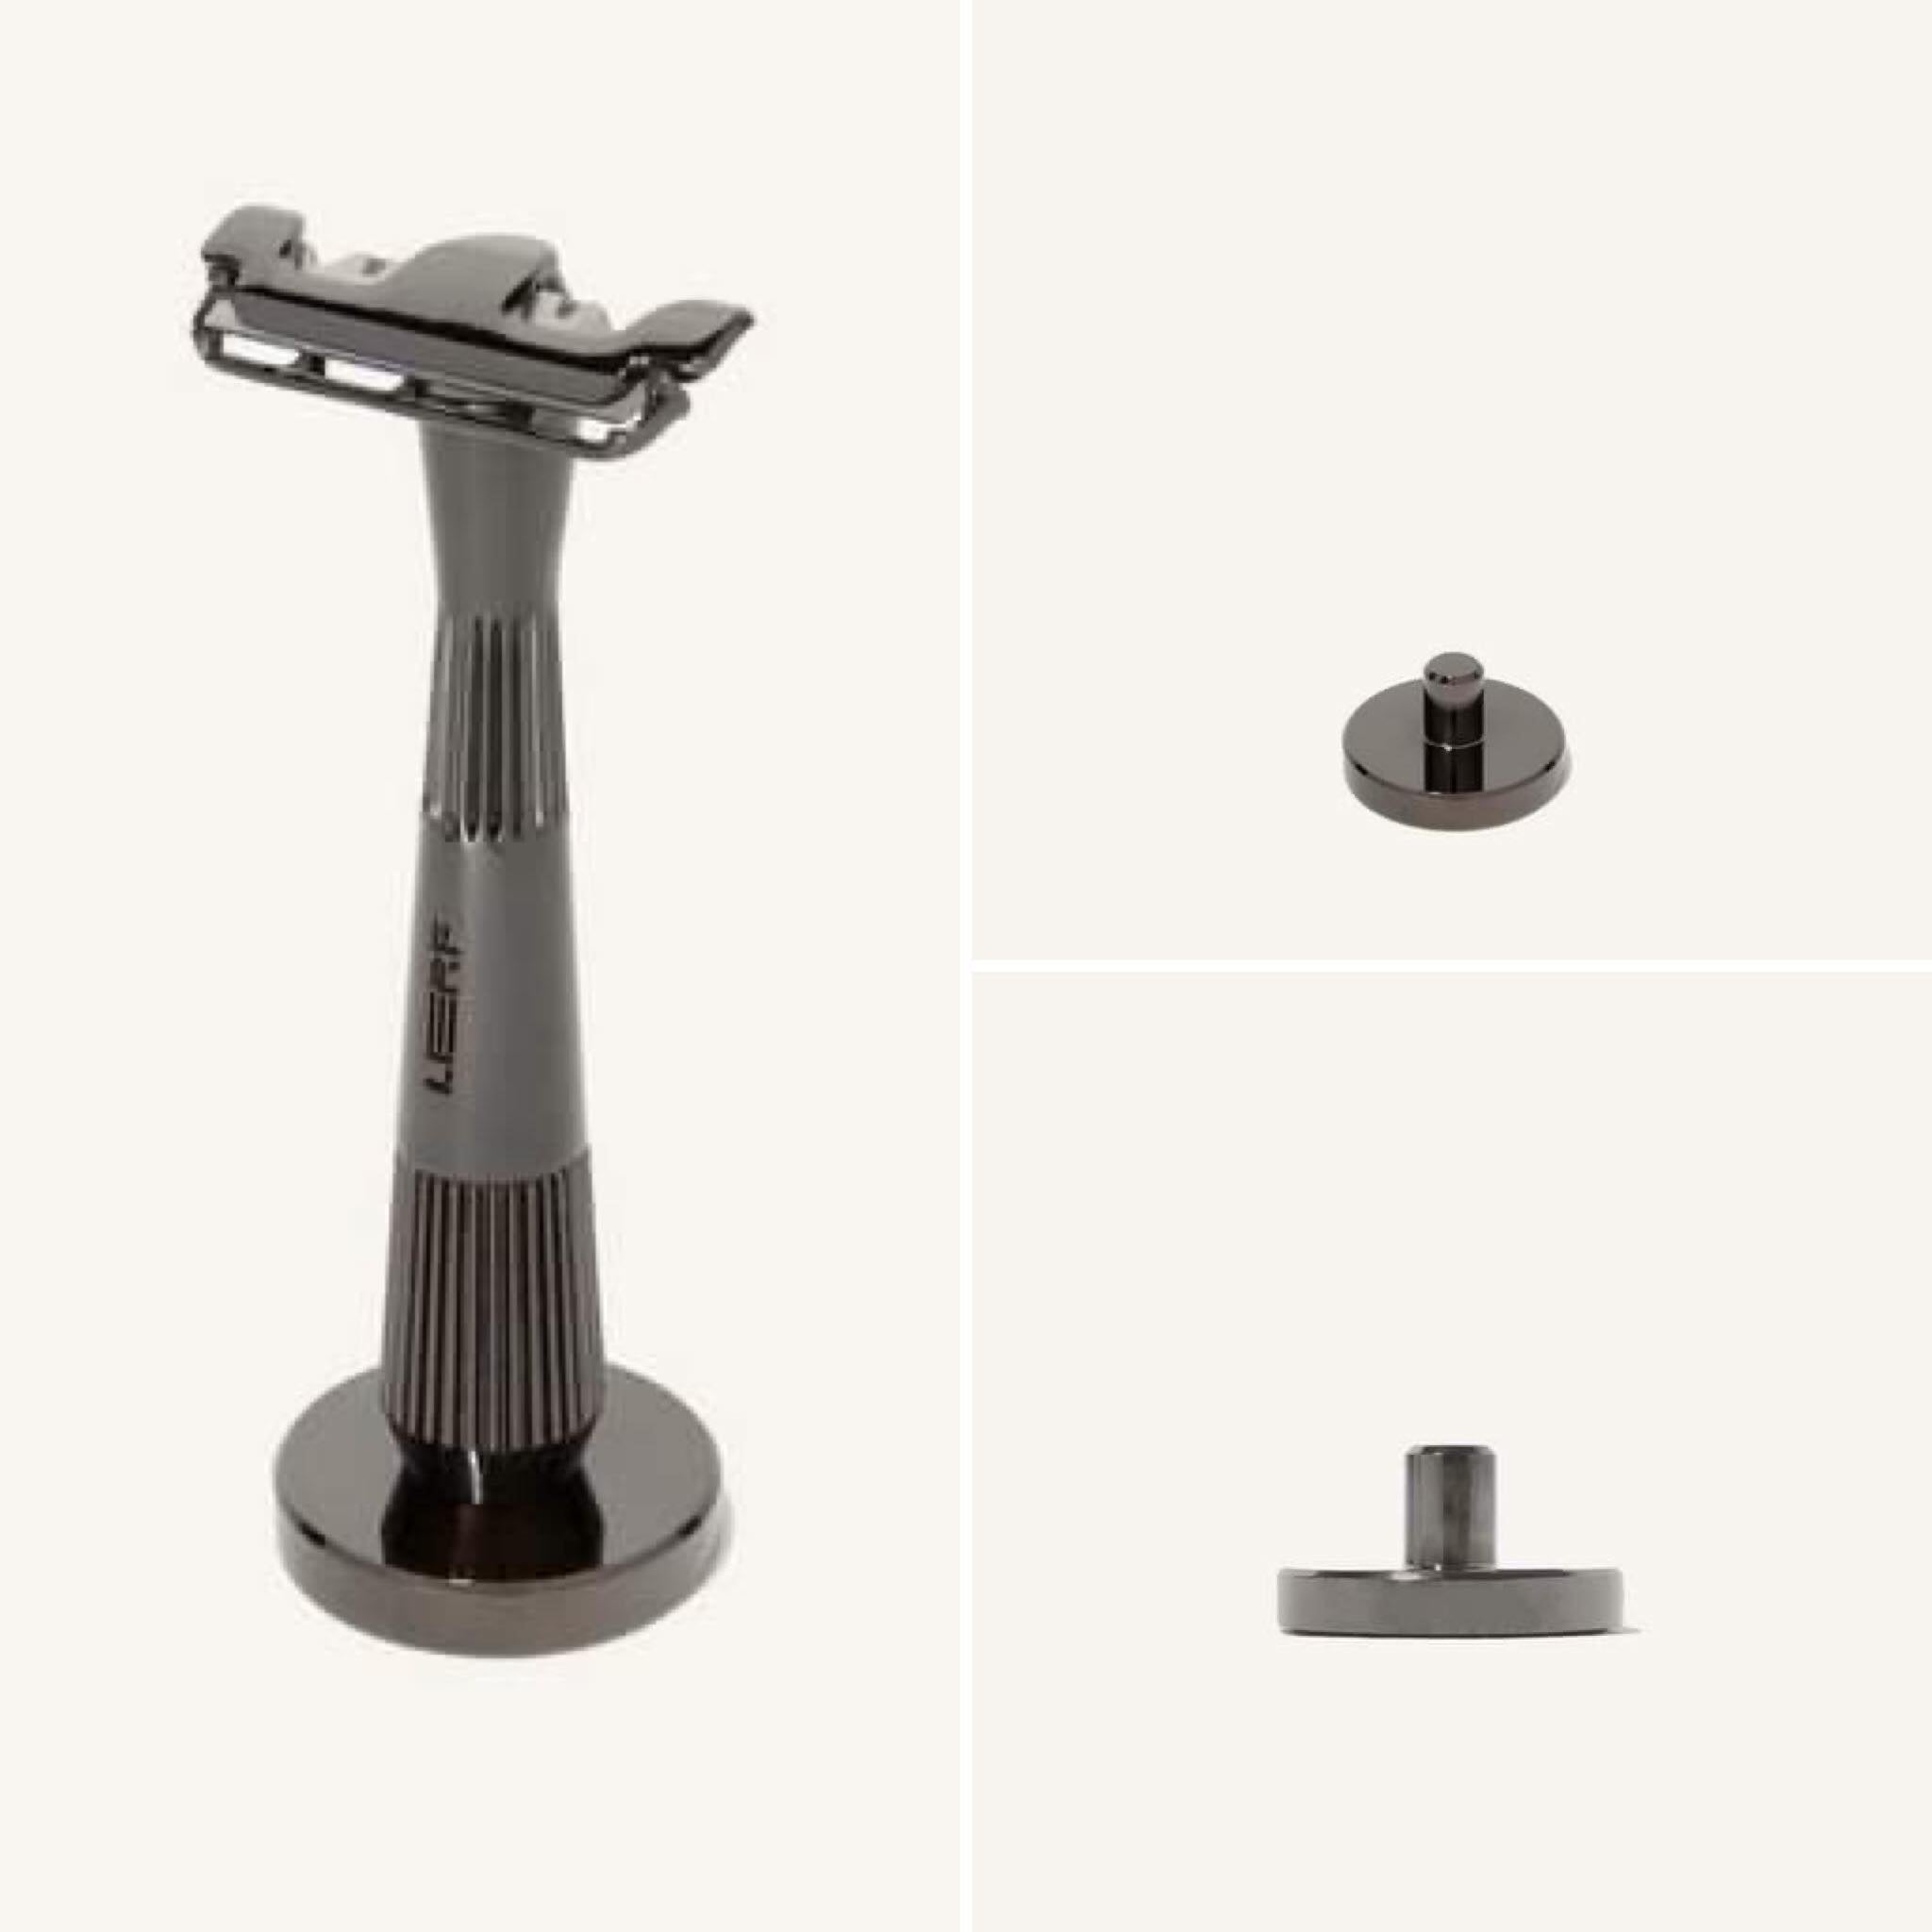 Display your mercury twig or thorn razor proudly in this convenient stand designed with helpful features like an embedded rubber foot so that it stays in place.